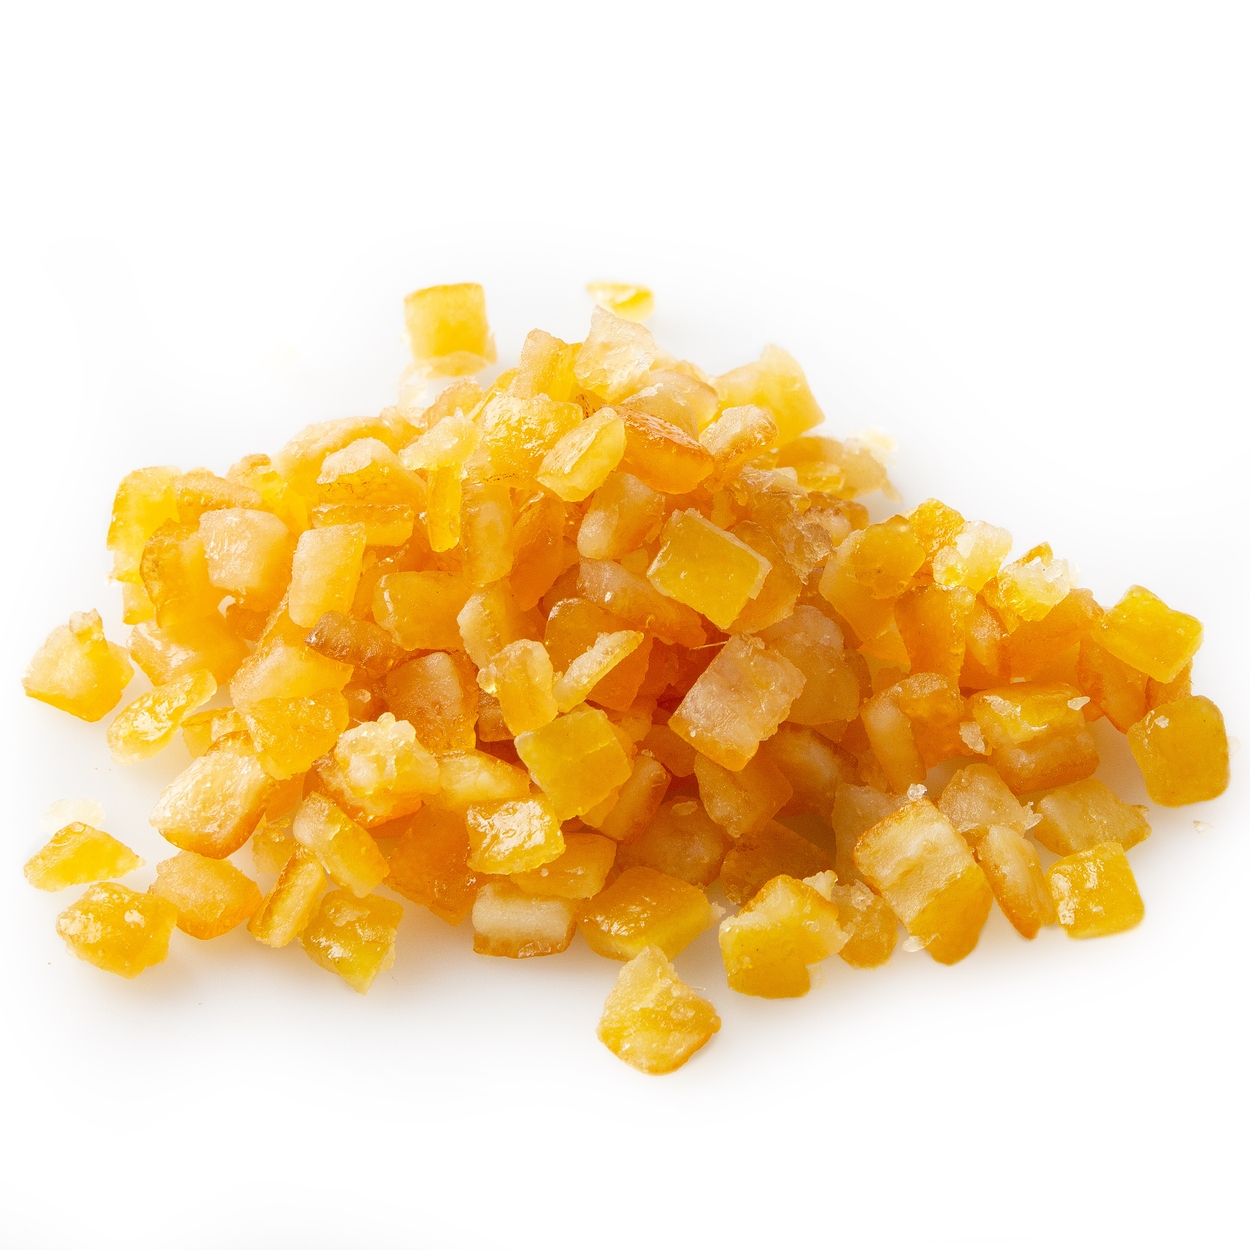 CANDIED MIXED PEEL, DICED